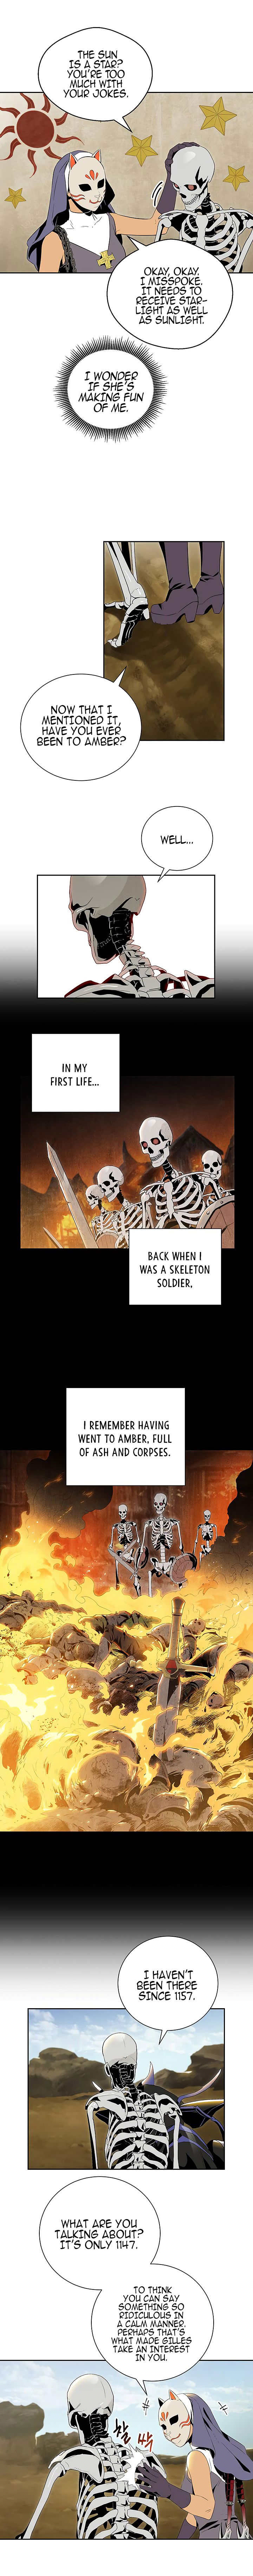 skeleton-soldier-couldnt-protect-the-dungeon-chap-62-9